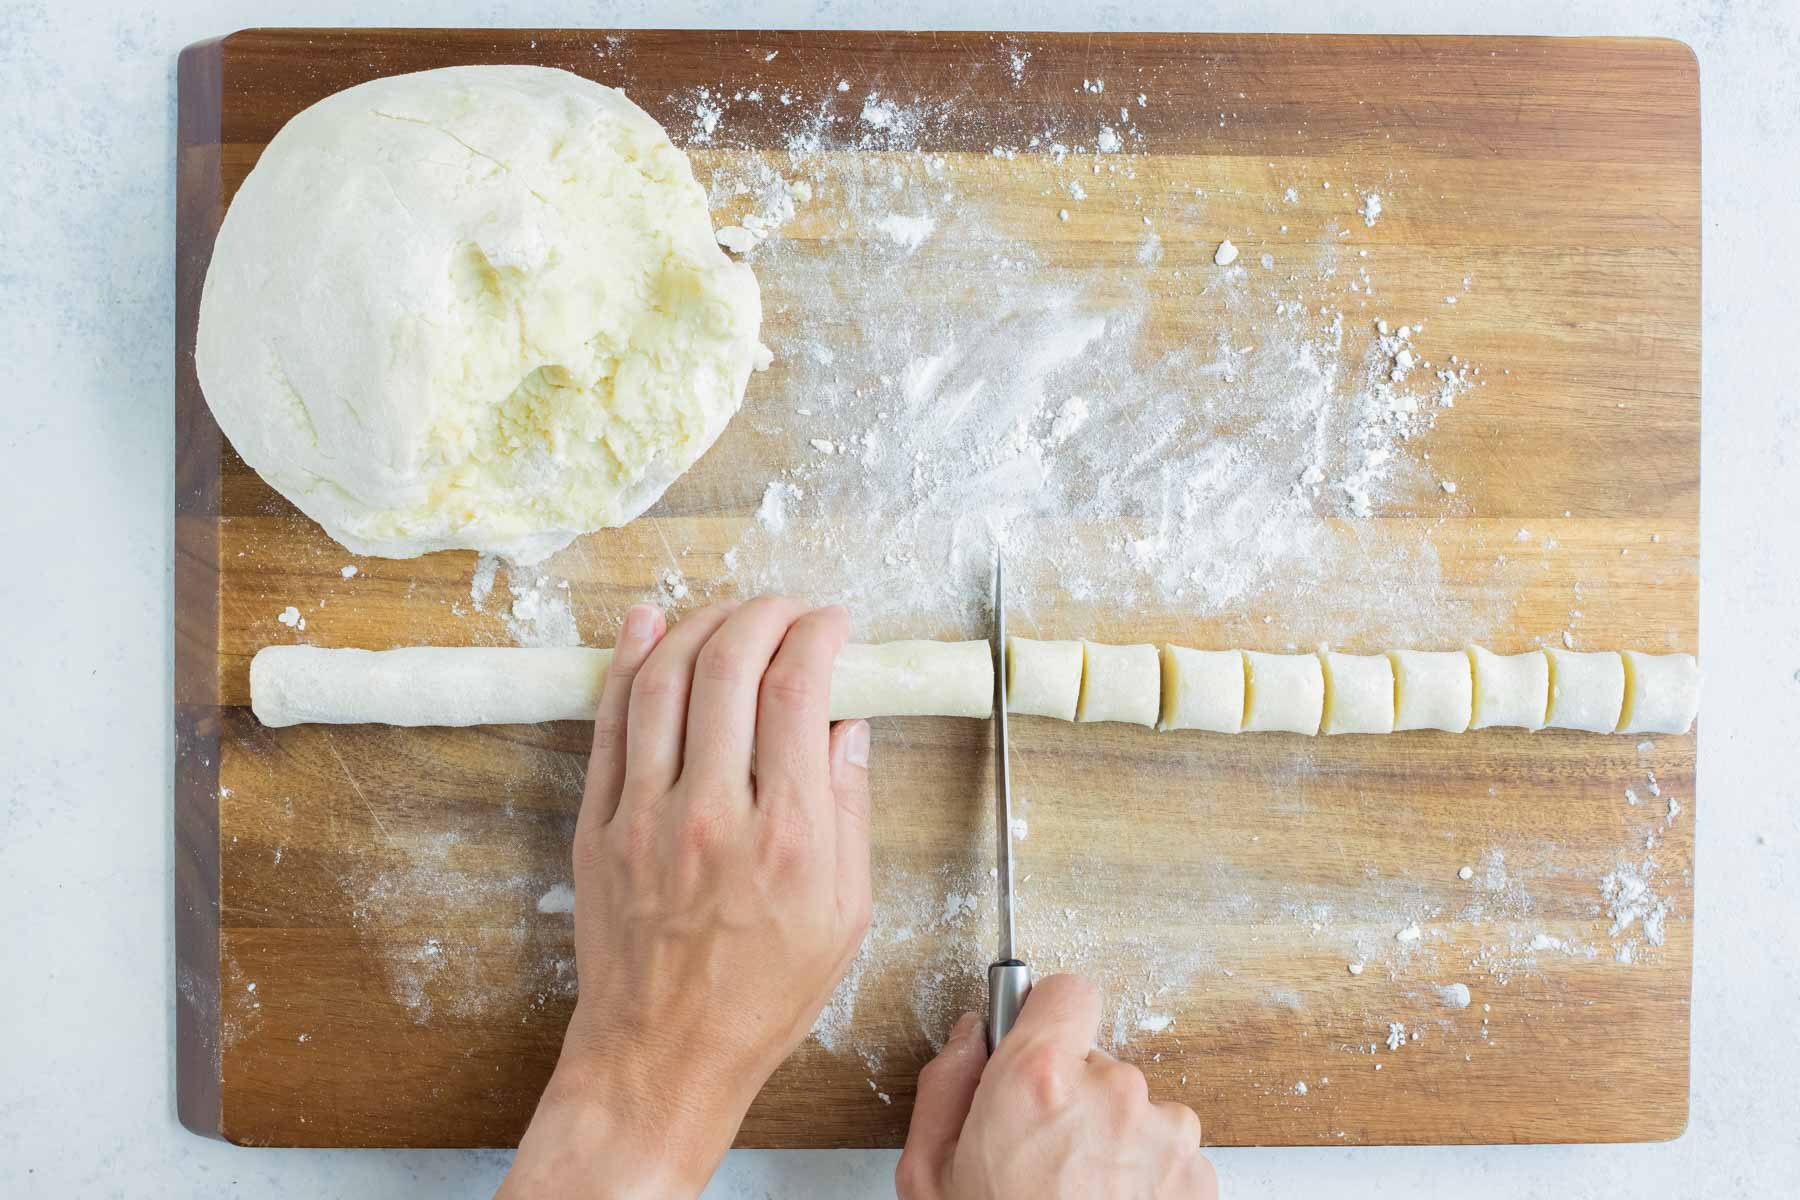 The dough rope is cut into pieces with a knife.